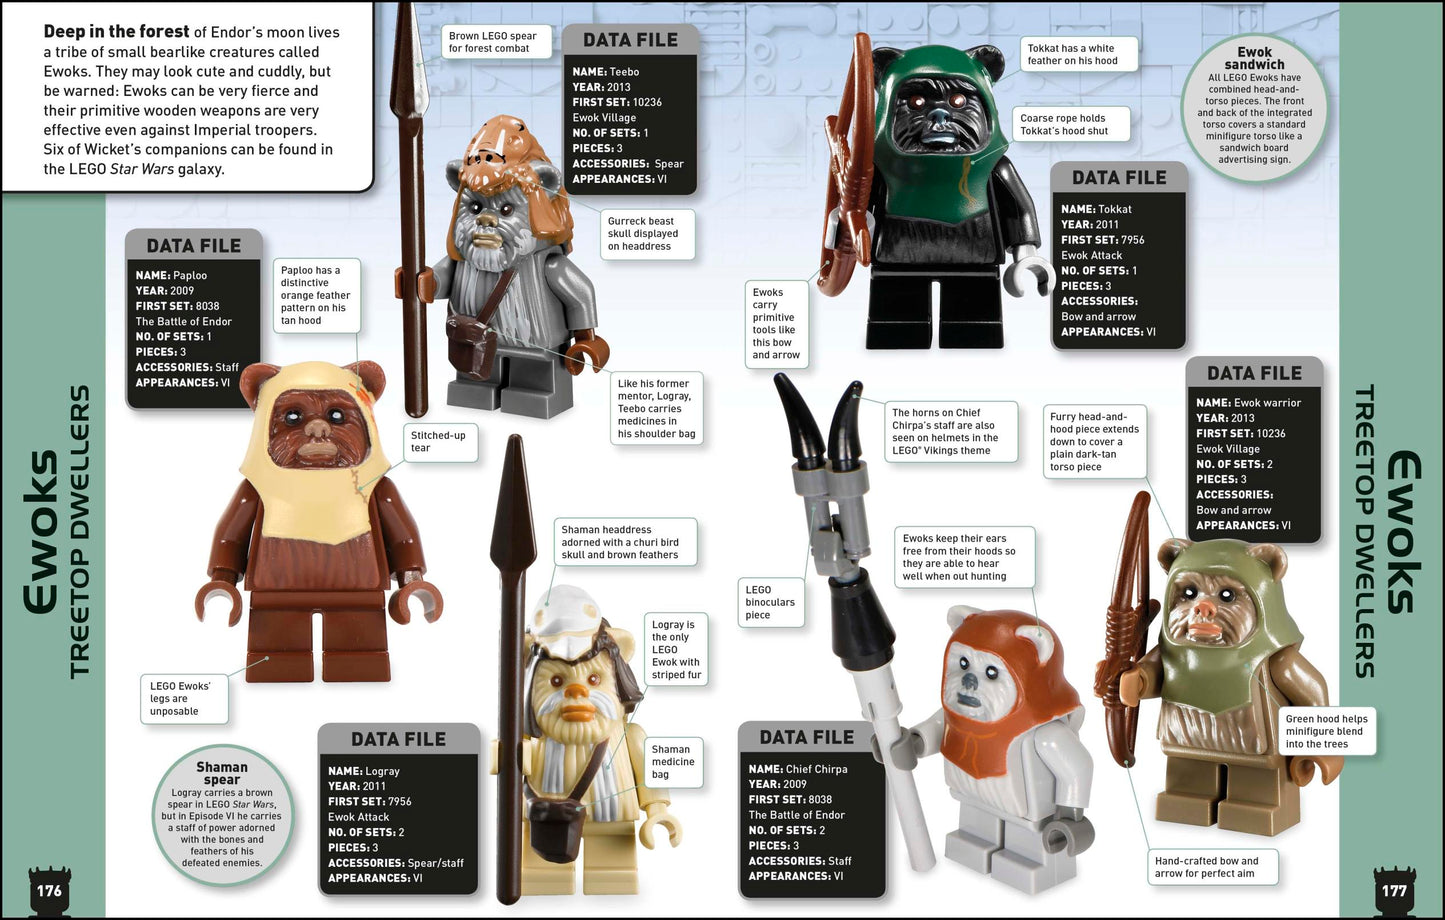 Lego Star Wars Character Encyclopedia New Edition with Exclusive Darth Maul Minifigure